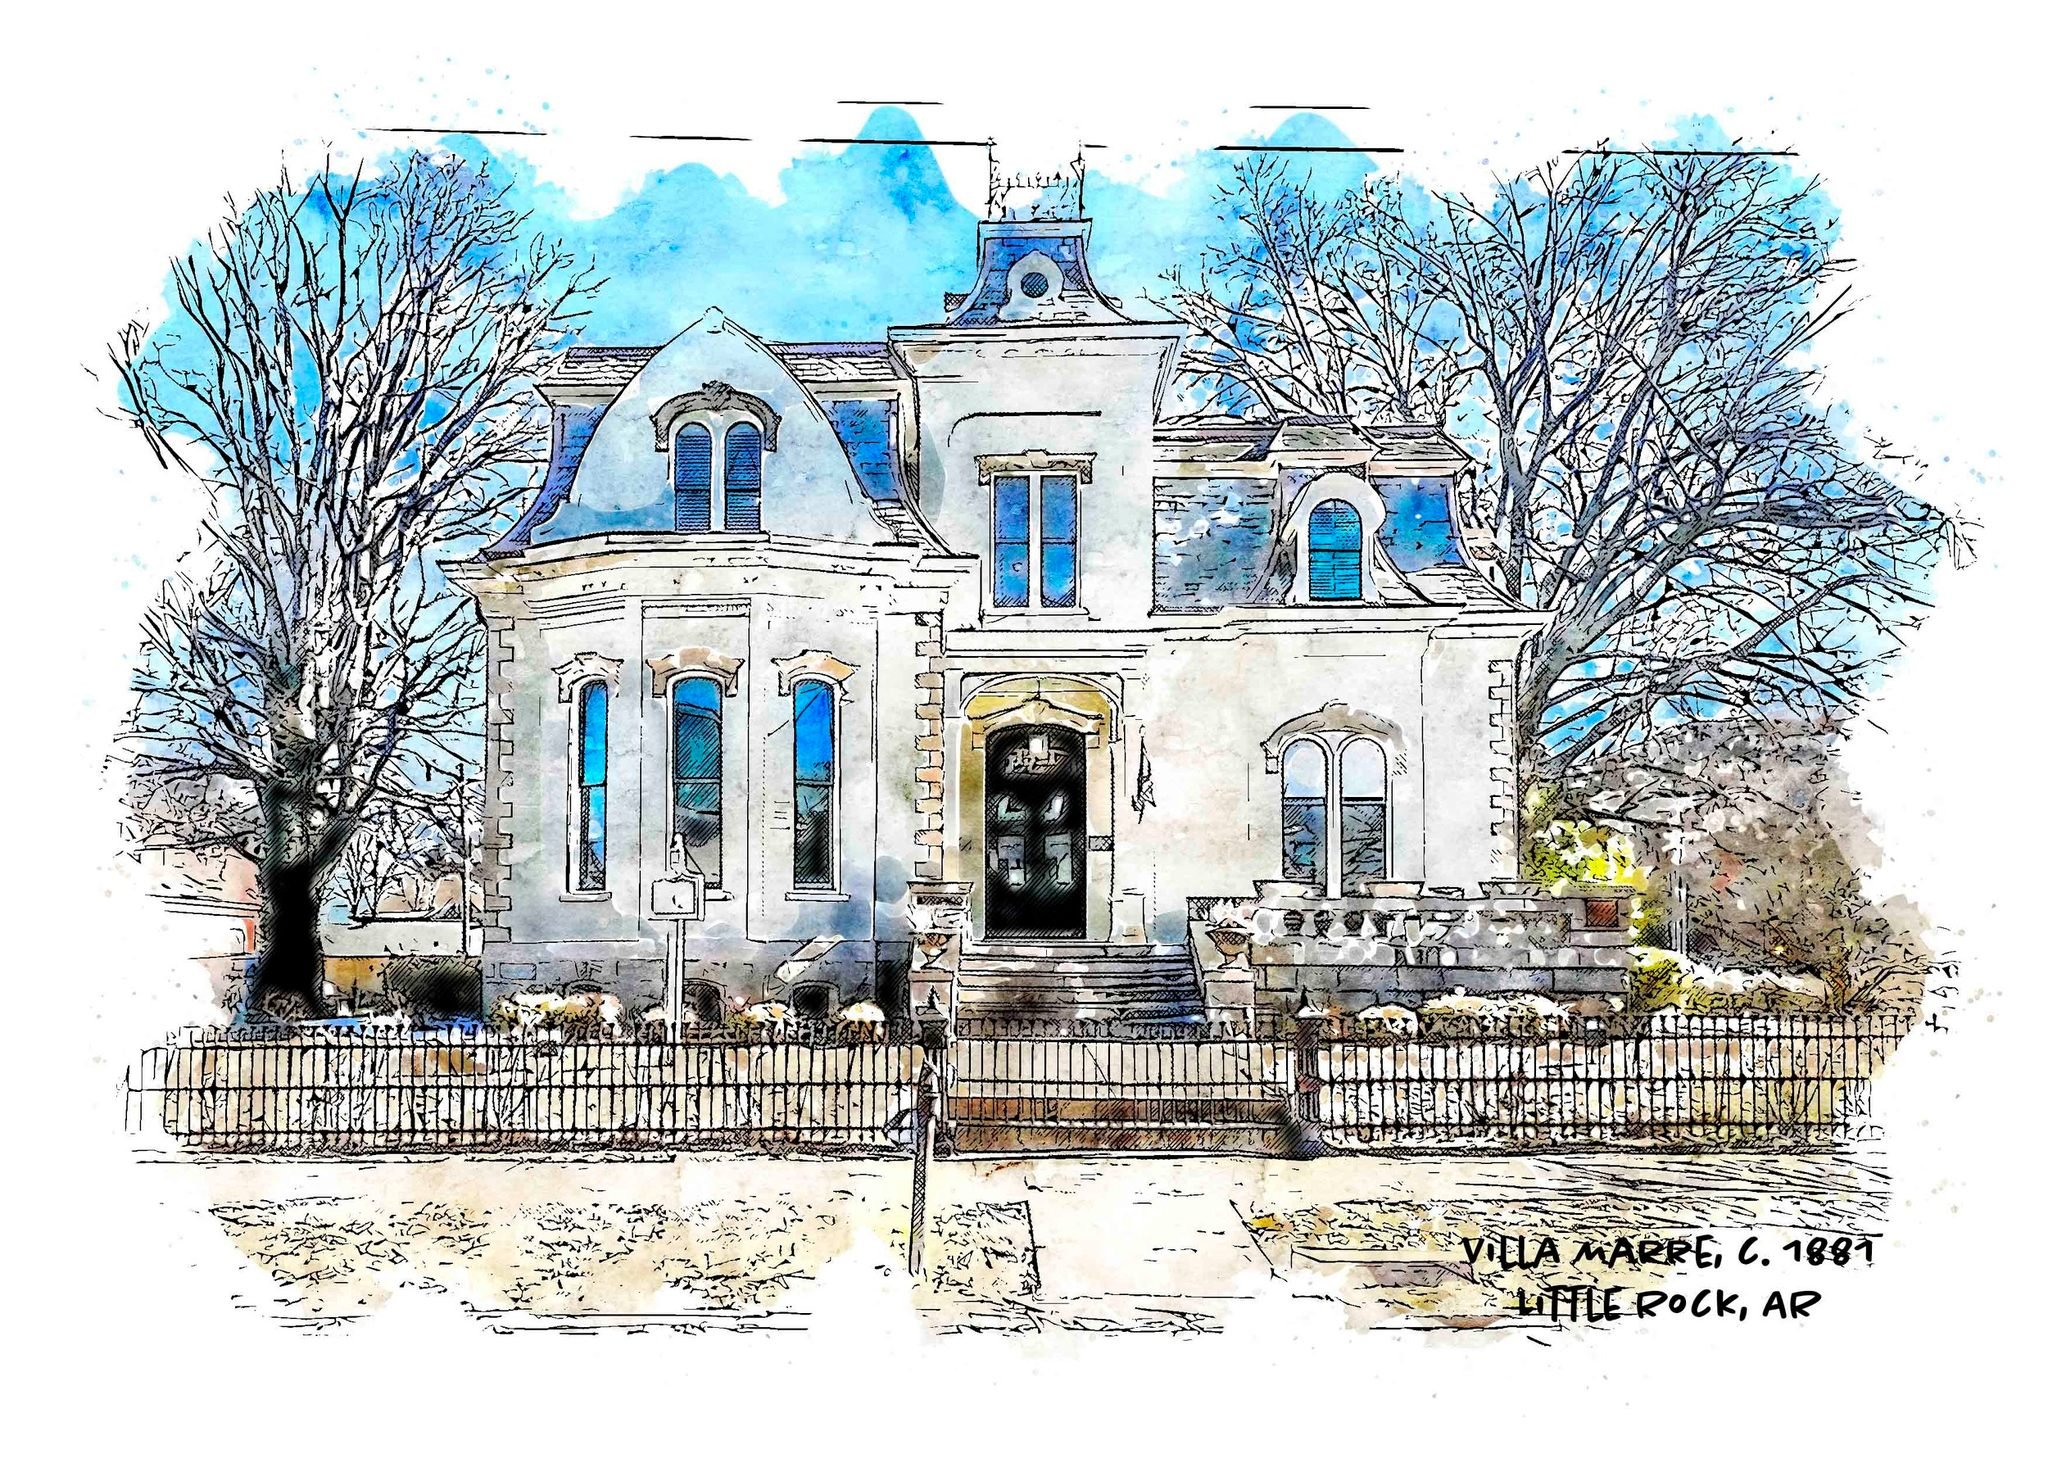 Do you remember the Sugarbaker &amp; Associates house from Designing Women?  Actually, it was the Villa Marre that is located in Little Rock.

Find us online at Etsy (SheStudiosArt) or in our store (she-studios.com/paper-shop)  @designing_women_offic